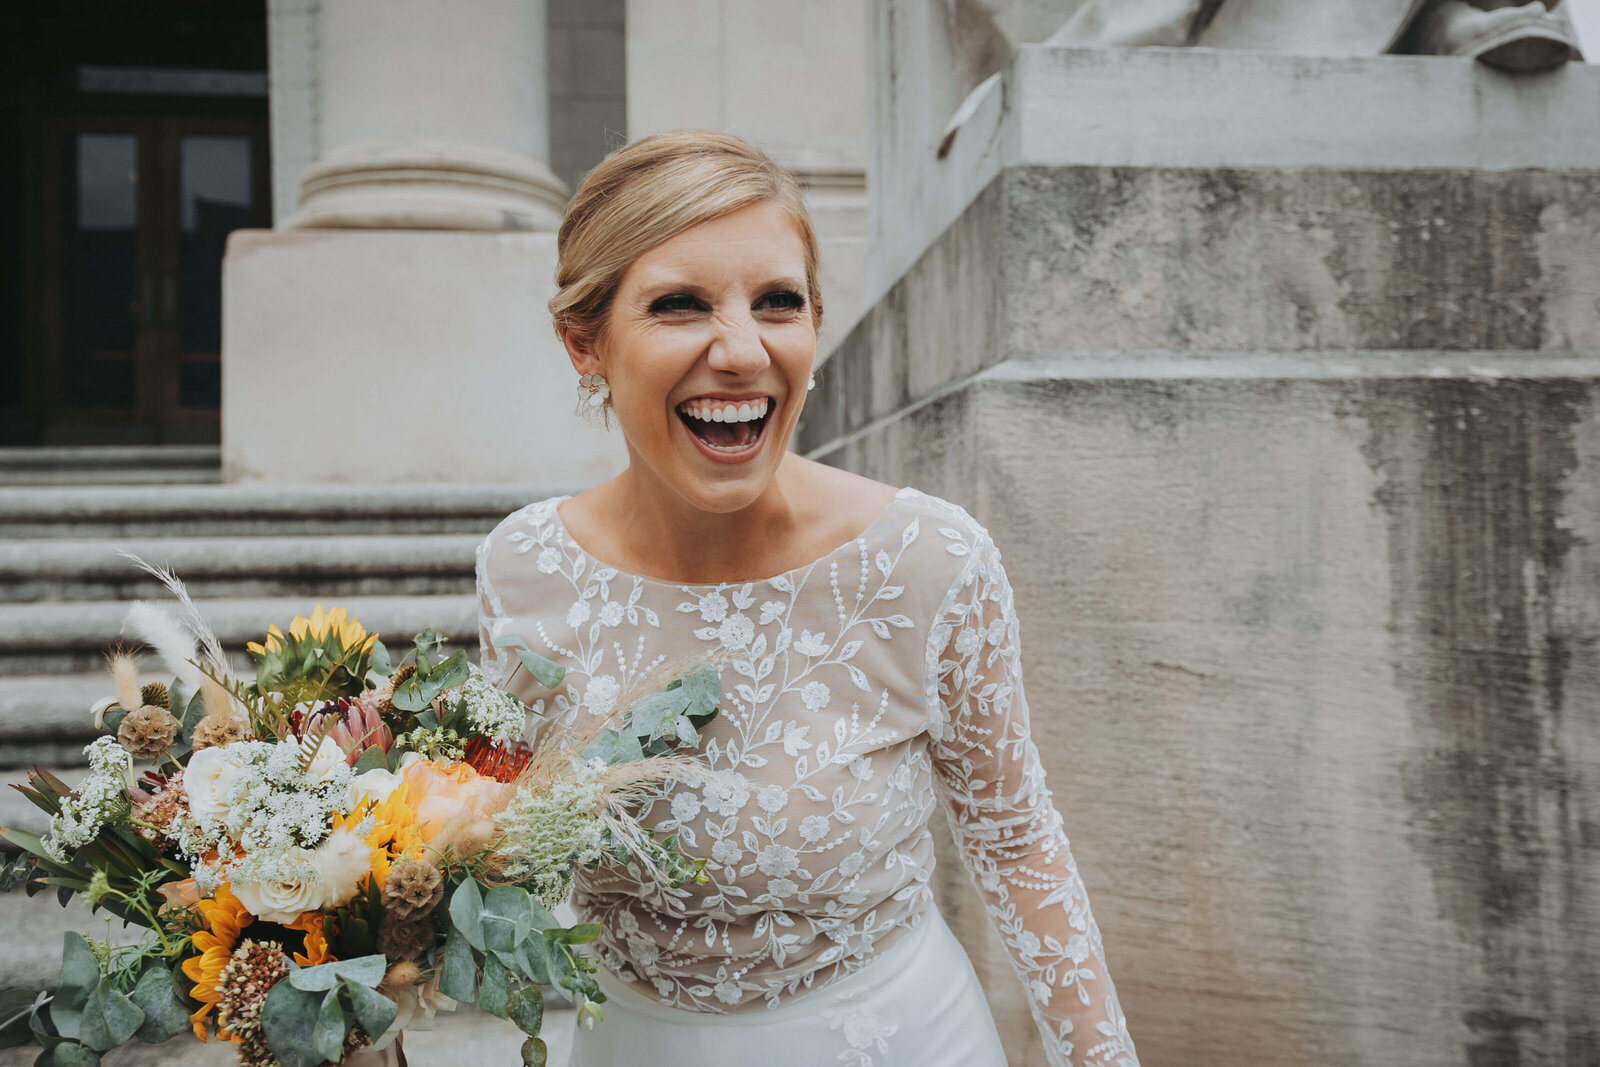 A Bride laughs while holding her bouquet after her intimate courthouse wedding